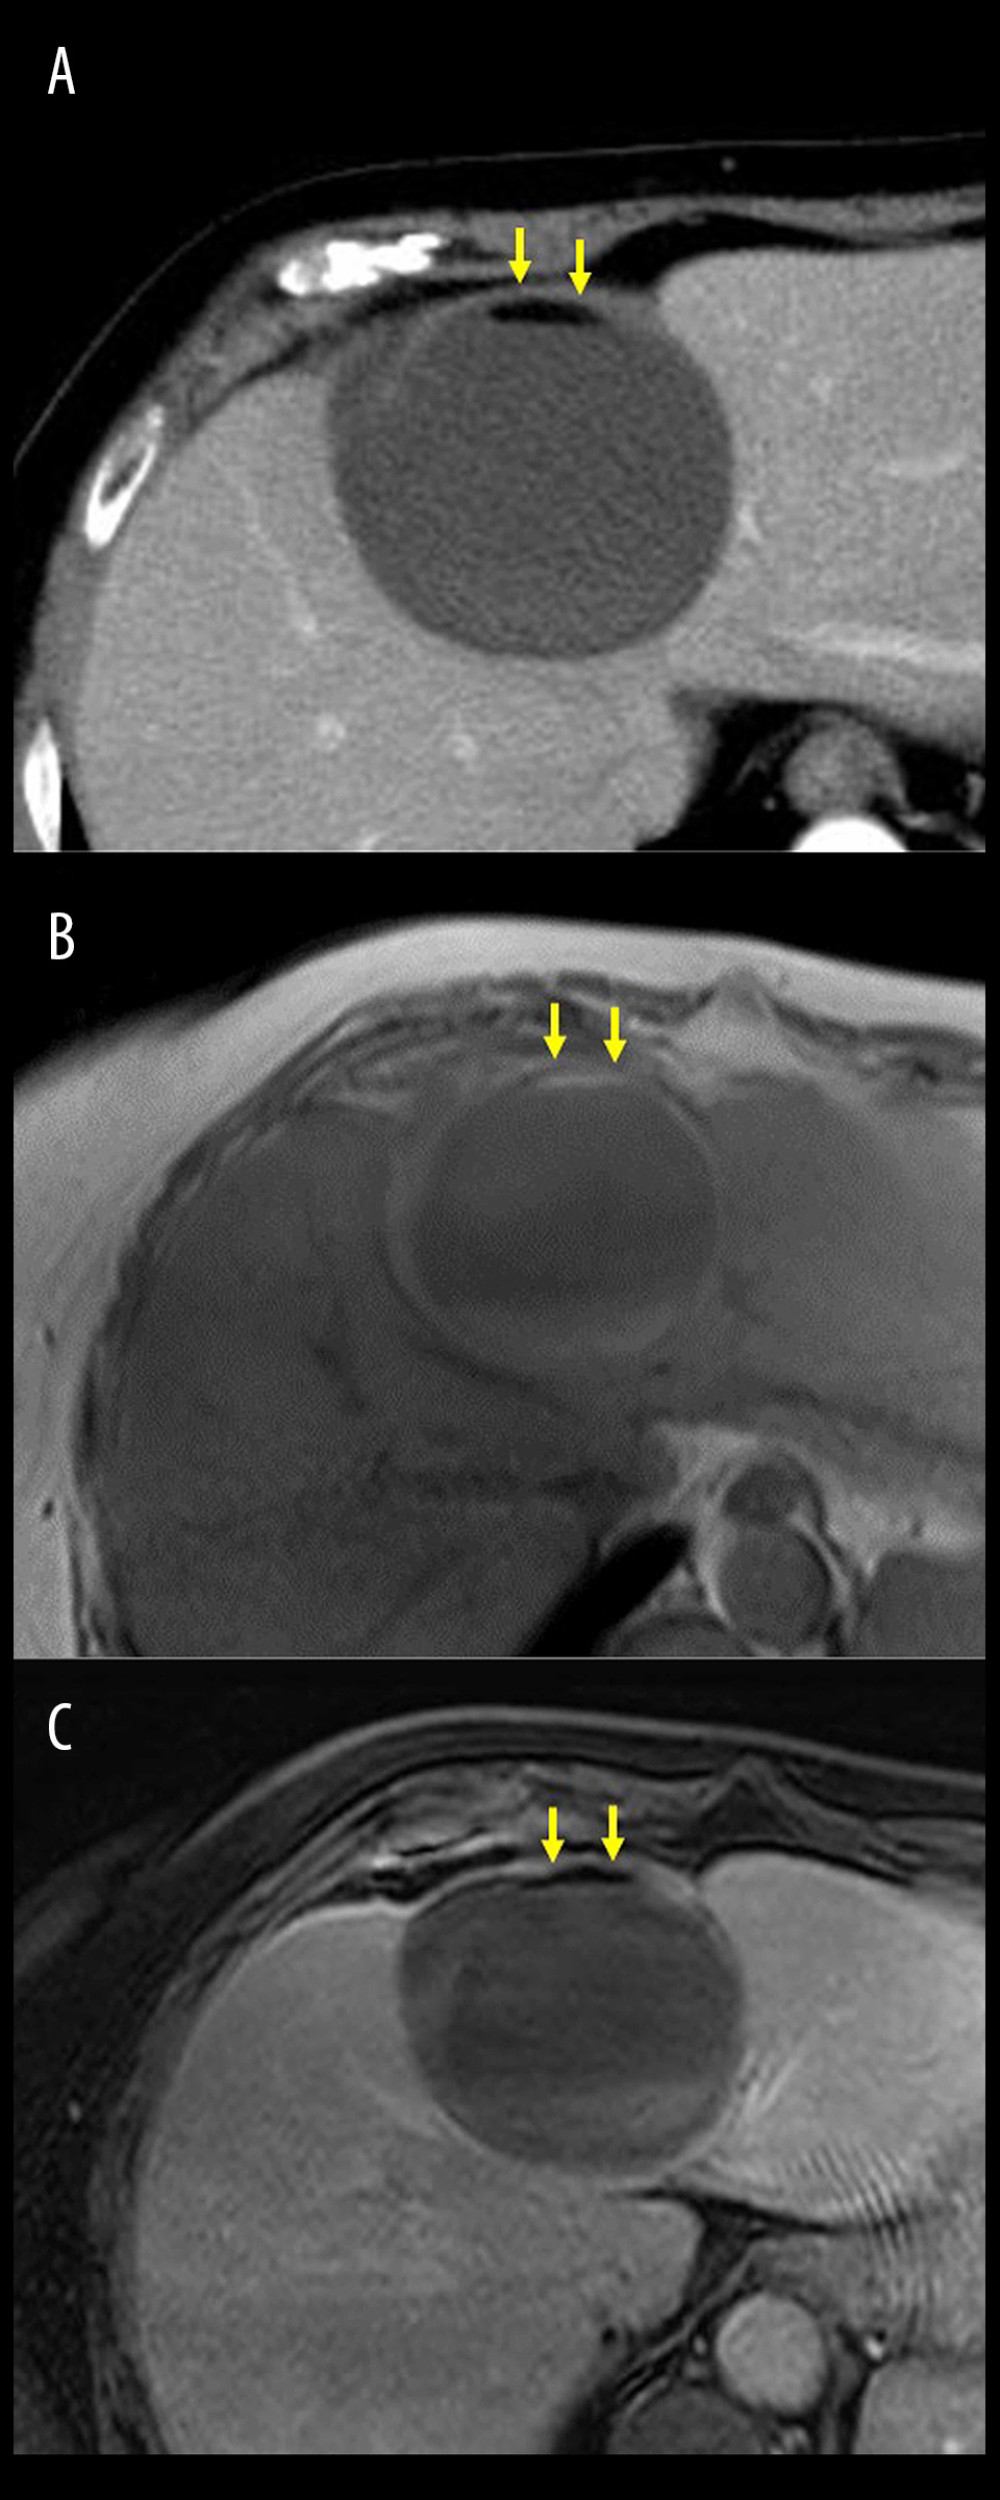 Fatty tissue within the cyst. Imaging findings of plain CT (A), T1-weighted MRI (B), and fat-suppressed MRI (C). The cystic, mucus-producing tumor clearly included fatty tissue (yellow arrows). CT – computed tomography; MRI – magnetic resonance imaging.